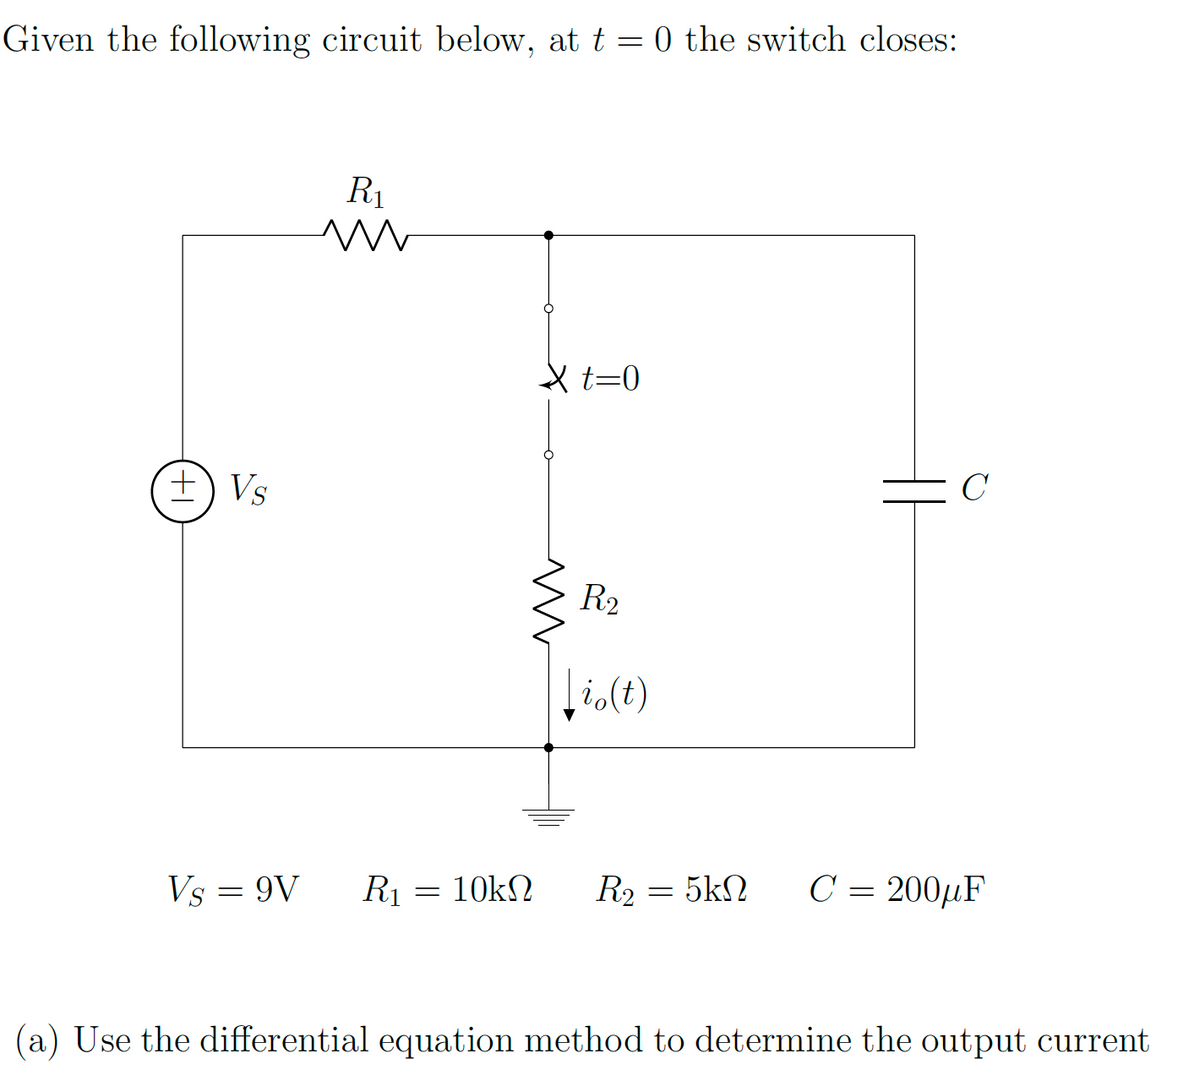 Given the following circuit below, at t=0 the switch closes:
+ Vs
R₁
m
Vs = 9V R₁
Ry = 10kΩ
Xt=0
R2
i(t)
R₂ = 5kN
C
C = 200μF
(a) Use the differential equation method to determine the output current